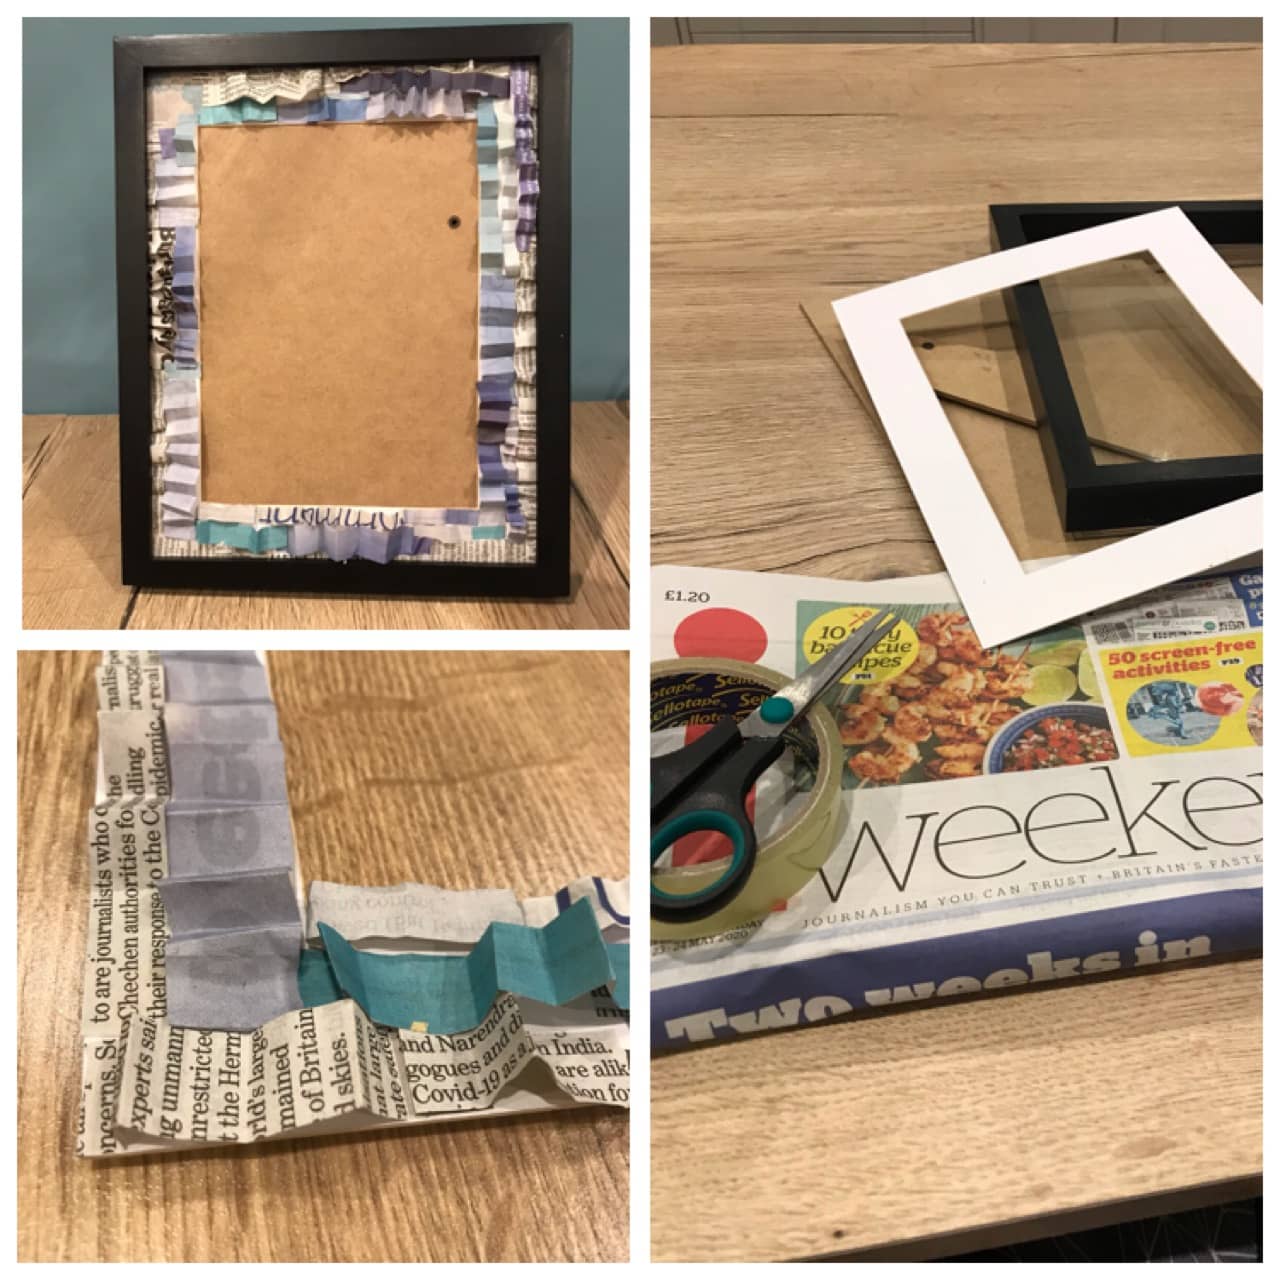 Picture frame given a new lease of life